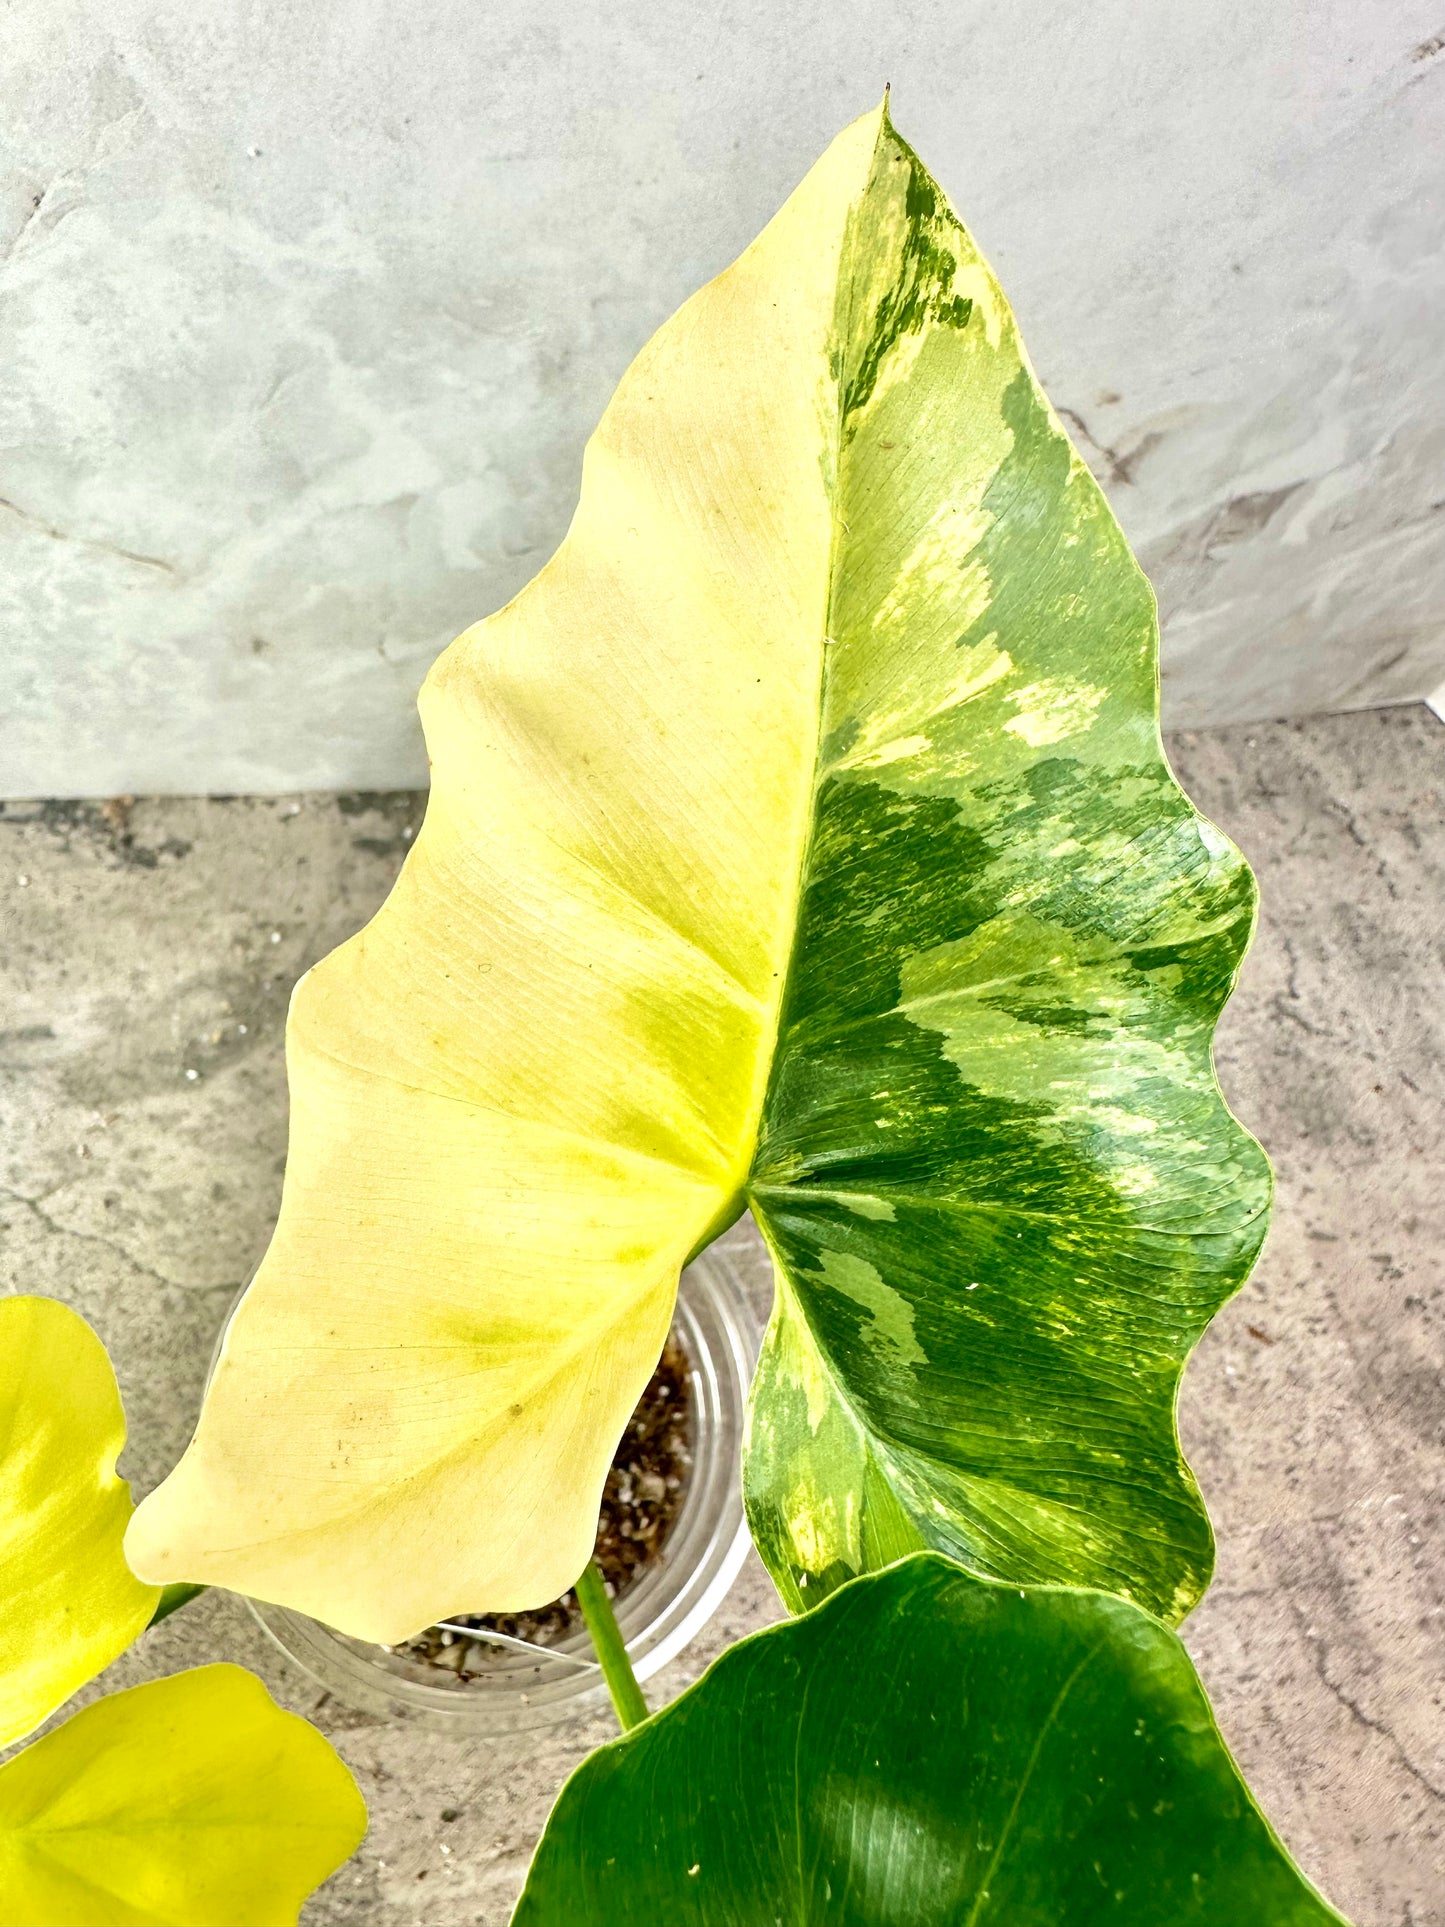 Unicorn: Philodendron Williamsii variegated rooted top cutting 3 leaves 1 sprout